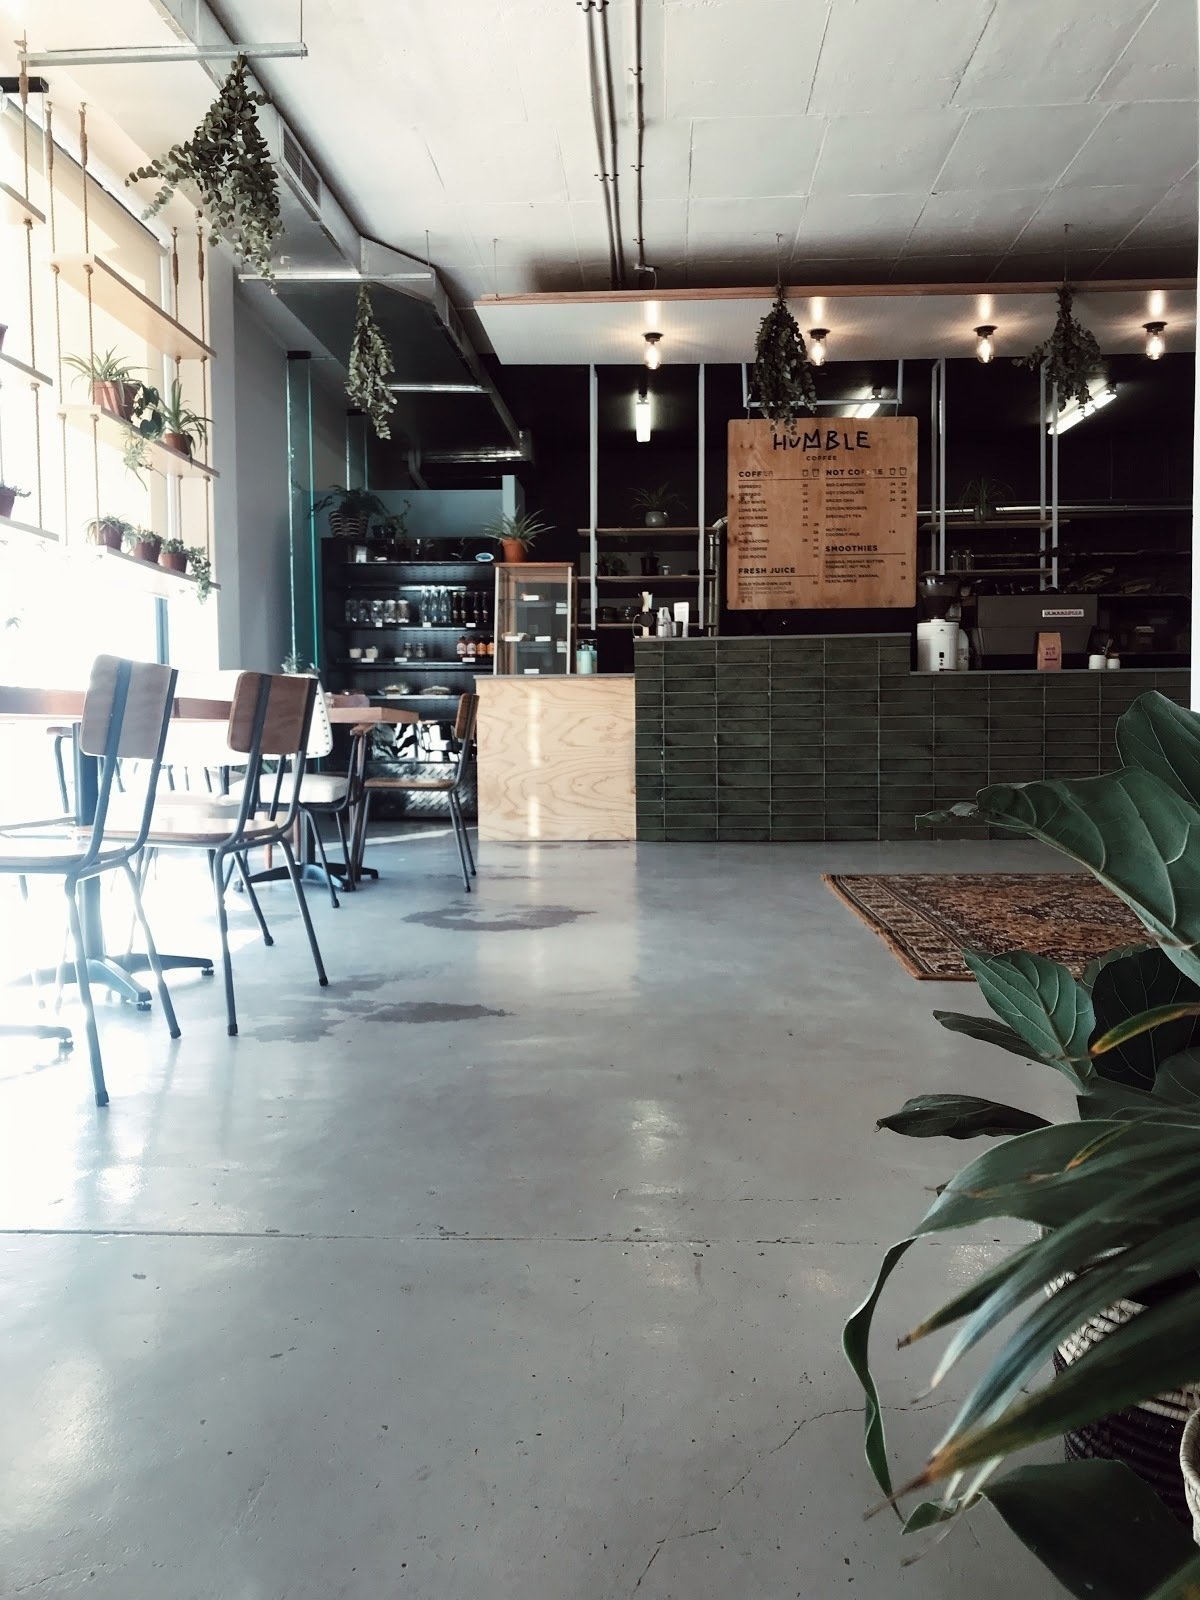 <span class="translation_missing" title="translation missing: en.meta.location_title, location_name: Humble Coffee - Churchill, city: Durban">Location Title</span>